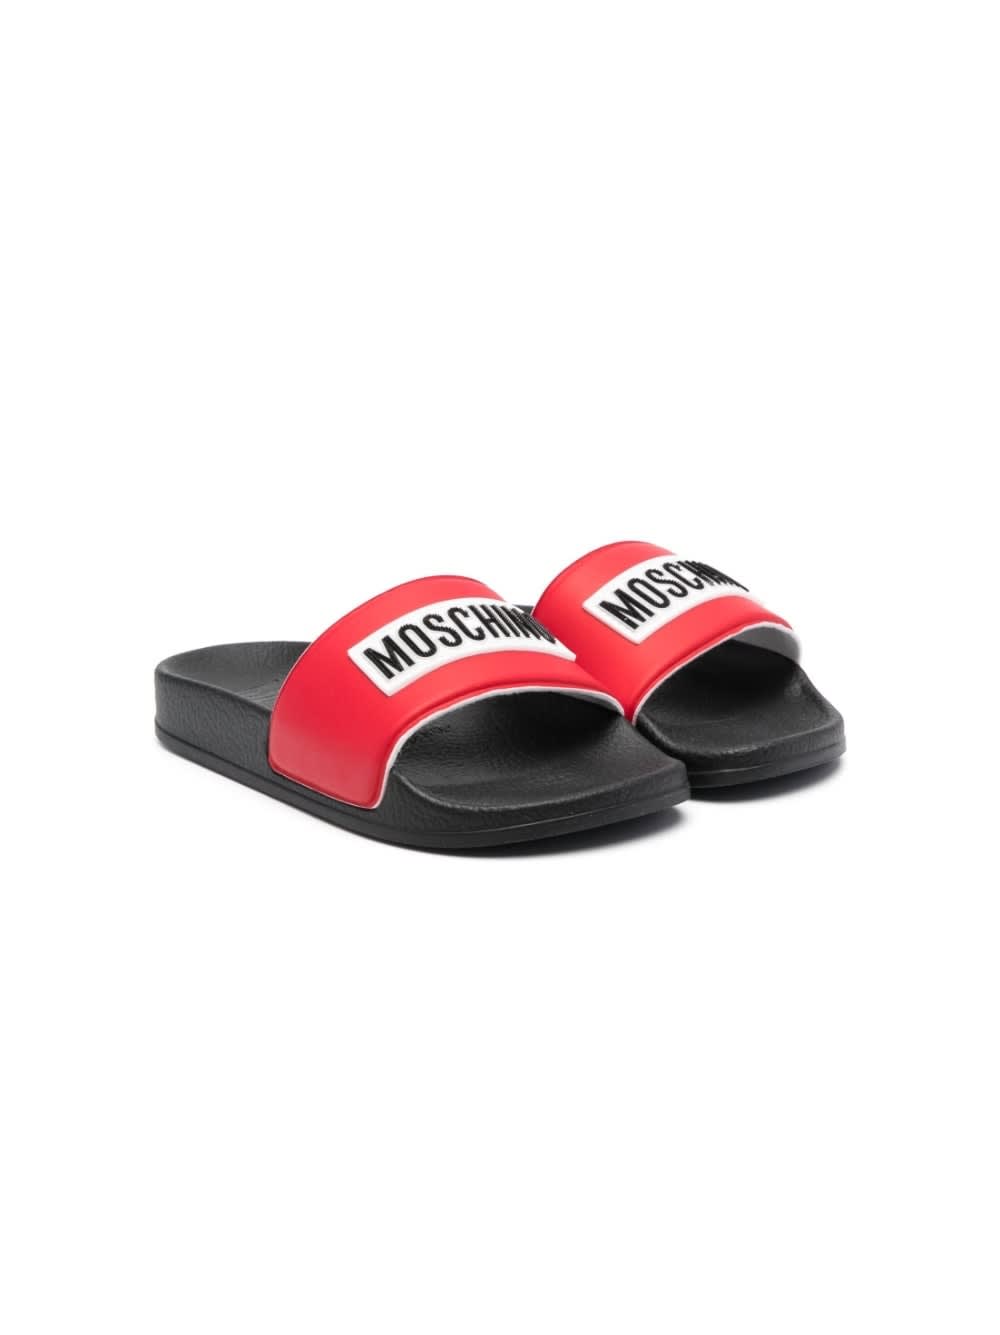 MOSCHINO SLIPPERS WITH LOGO